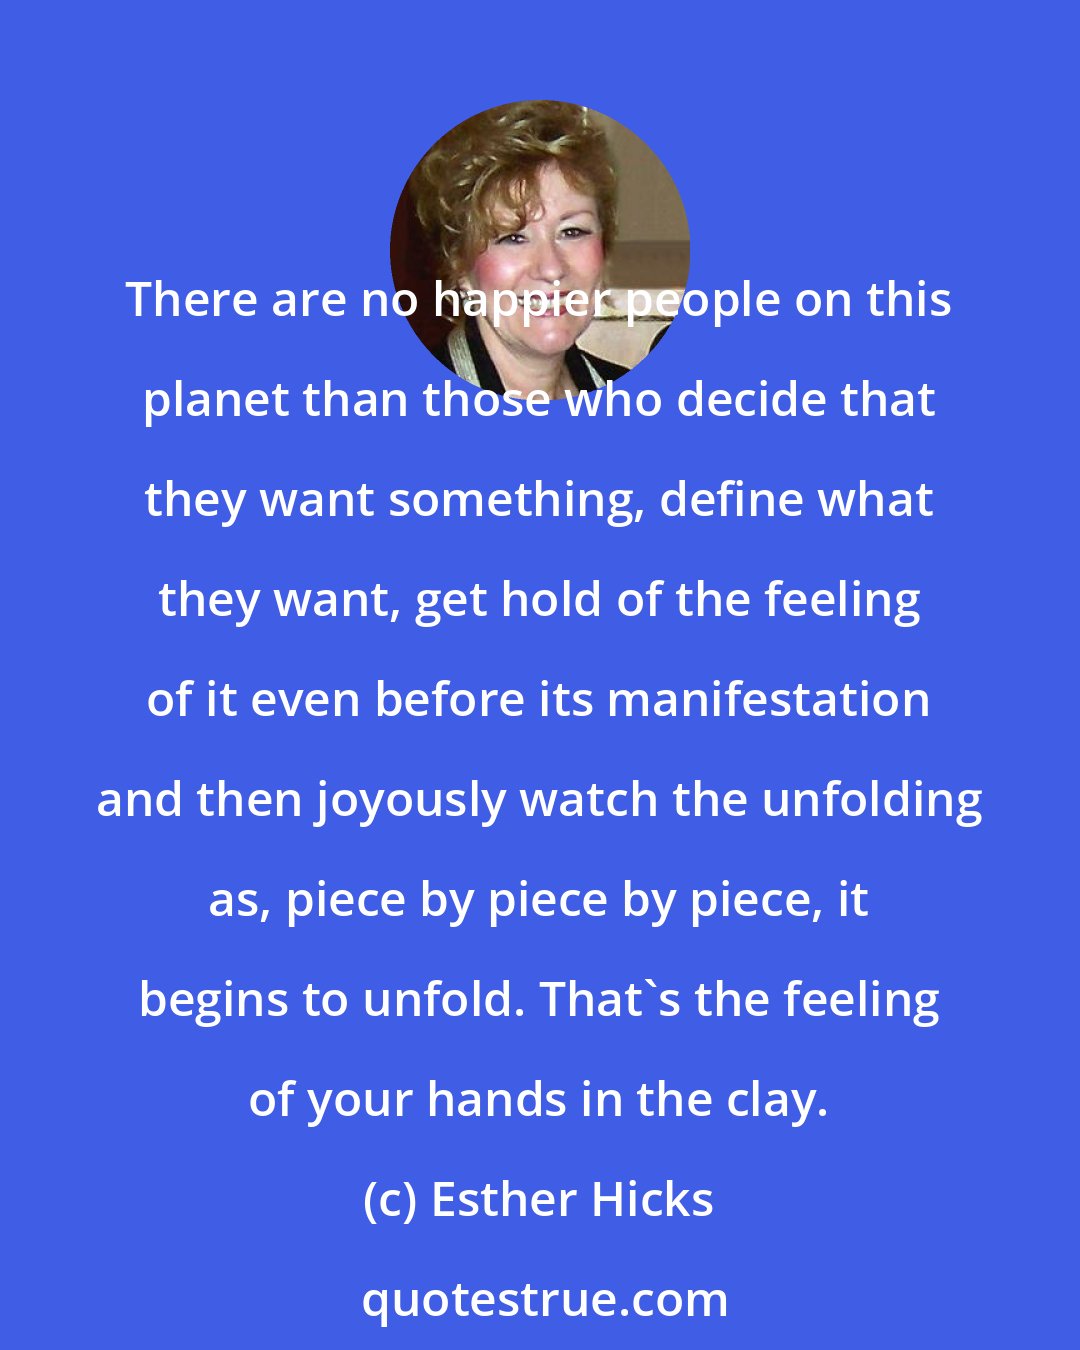 Esther Hicks: There are no happier people on this planet than those who decide that they want something, define what they want, get hold of the feeling of it even before its manifestation and then joyously watch the unfolding as, piece by piece by piece, it begins to unfold. That's the feeling of your hands in the clay.